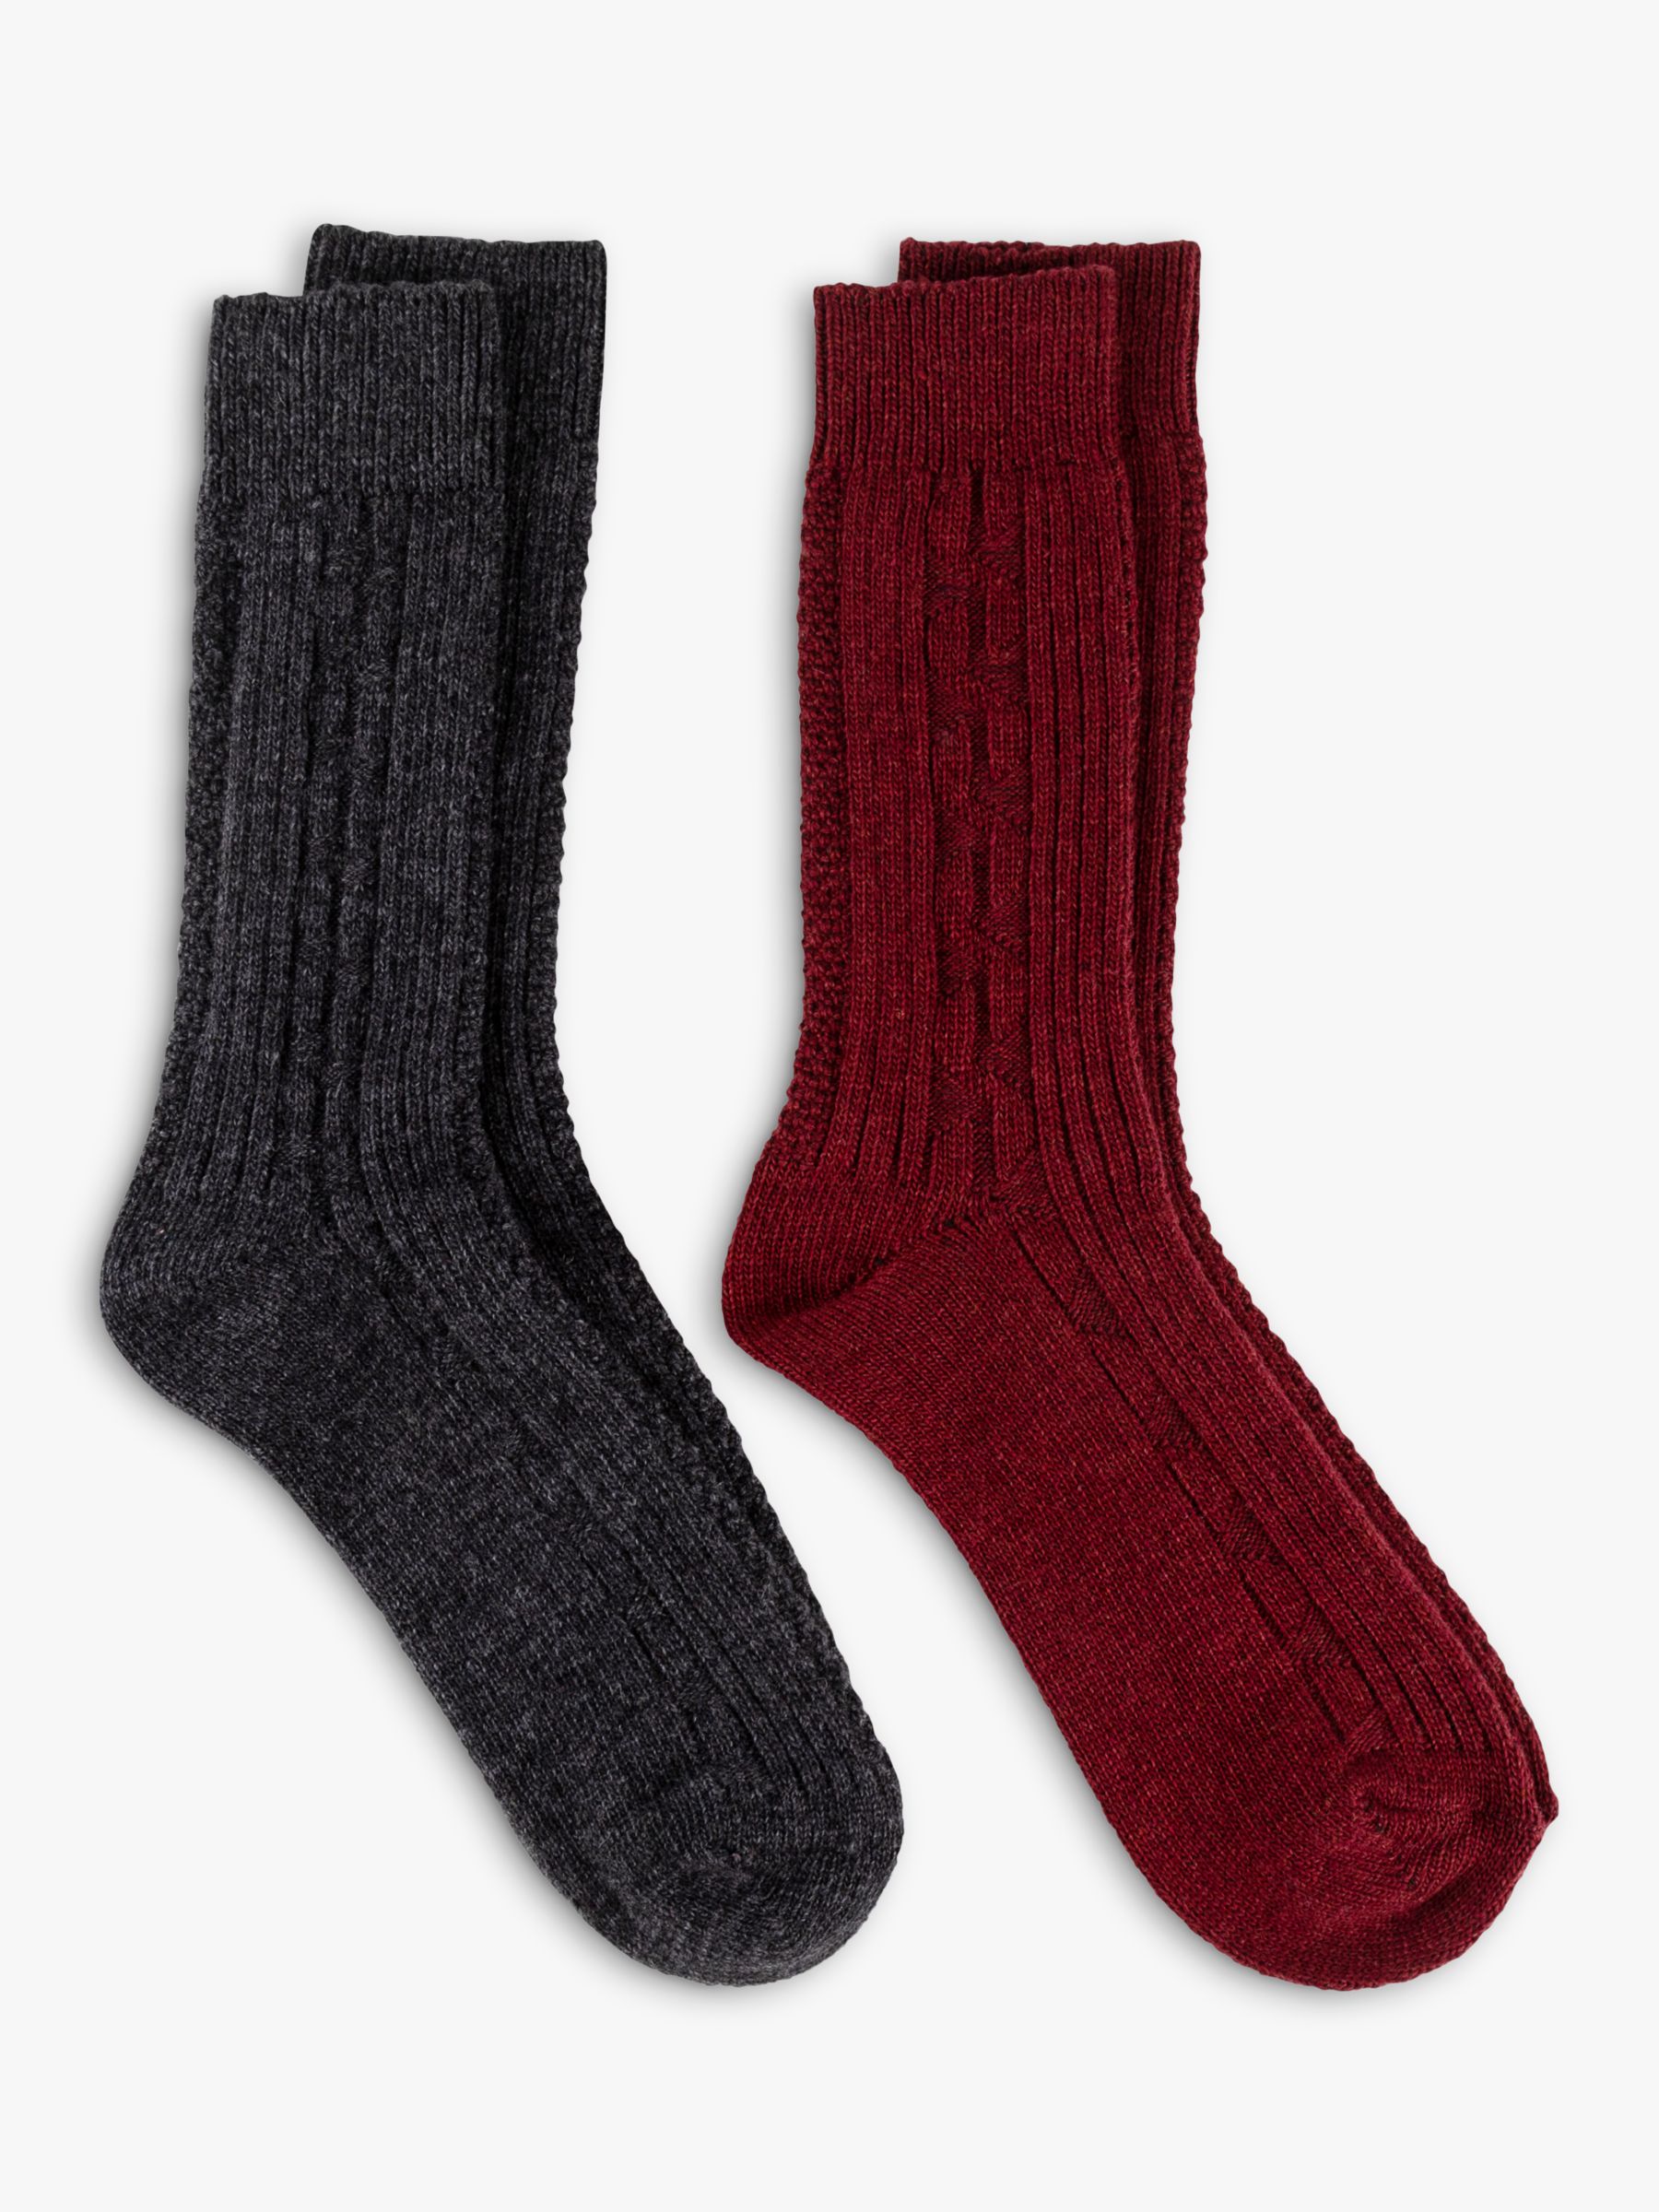 Buy totes Cable Knit Socks, Pack of 2, Burgundy/Charcoal Online at johnlewis.com